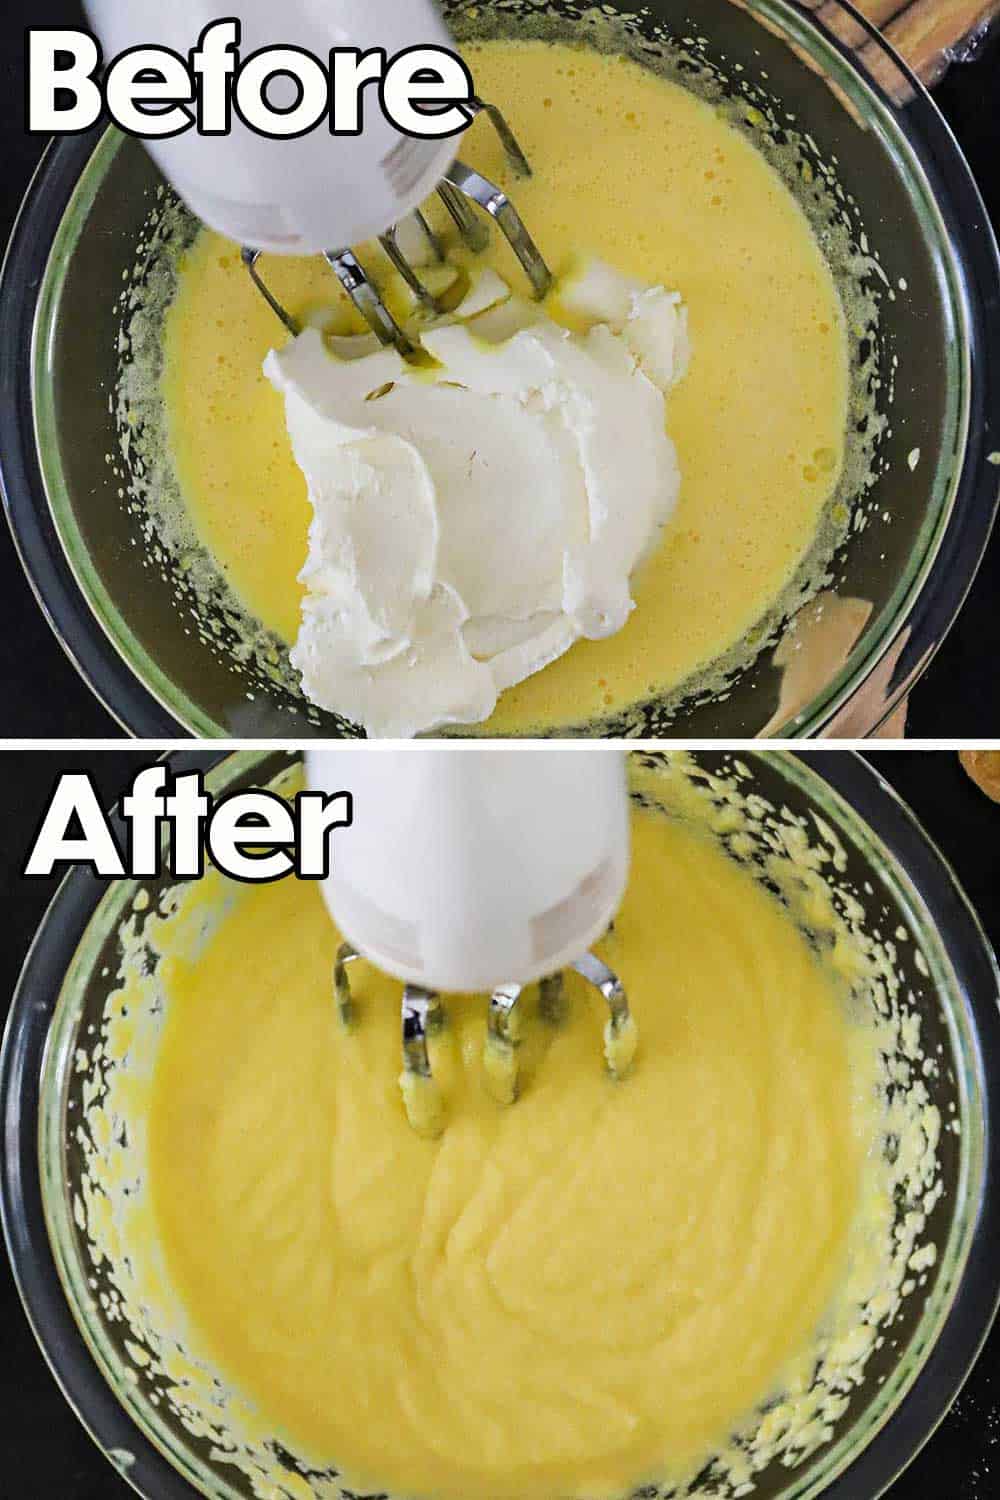 A glass bowl filled with creamed eggs and sugar with mascarpone being added and then the same bowl after the cheese has been blended in.